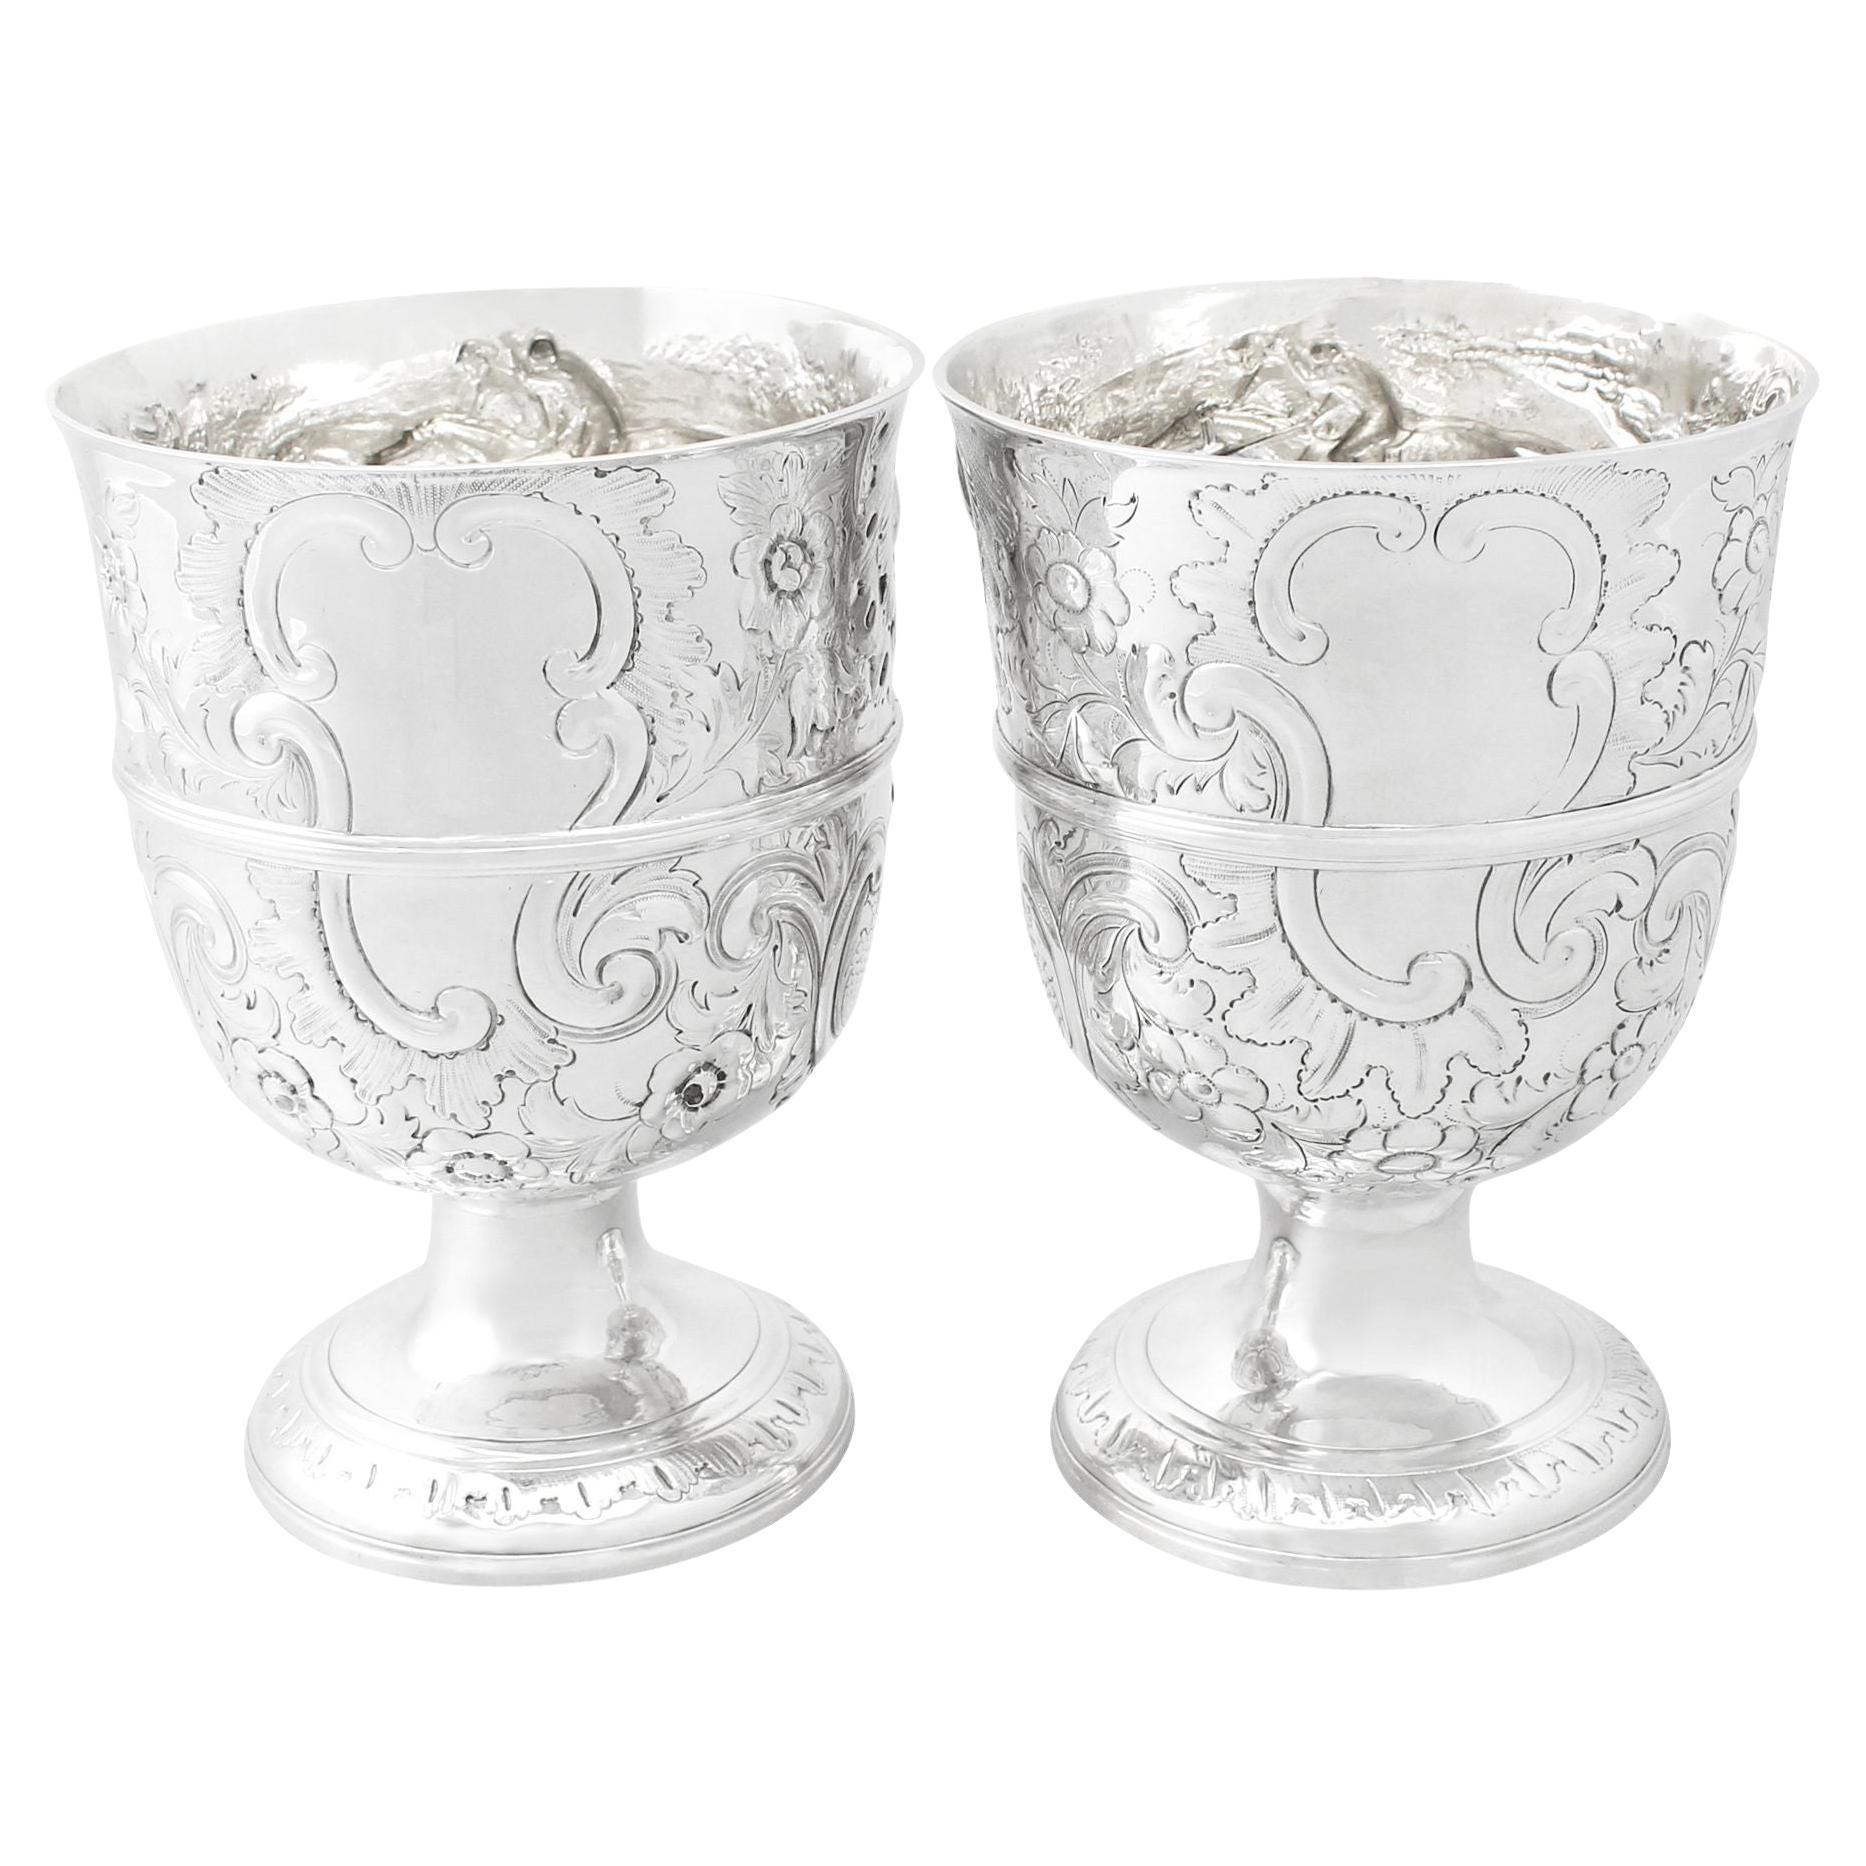 Antique English Sterling Silver Presentation Cups